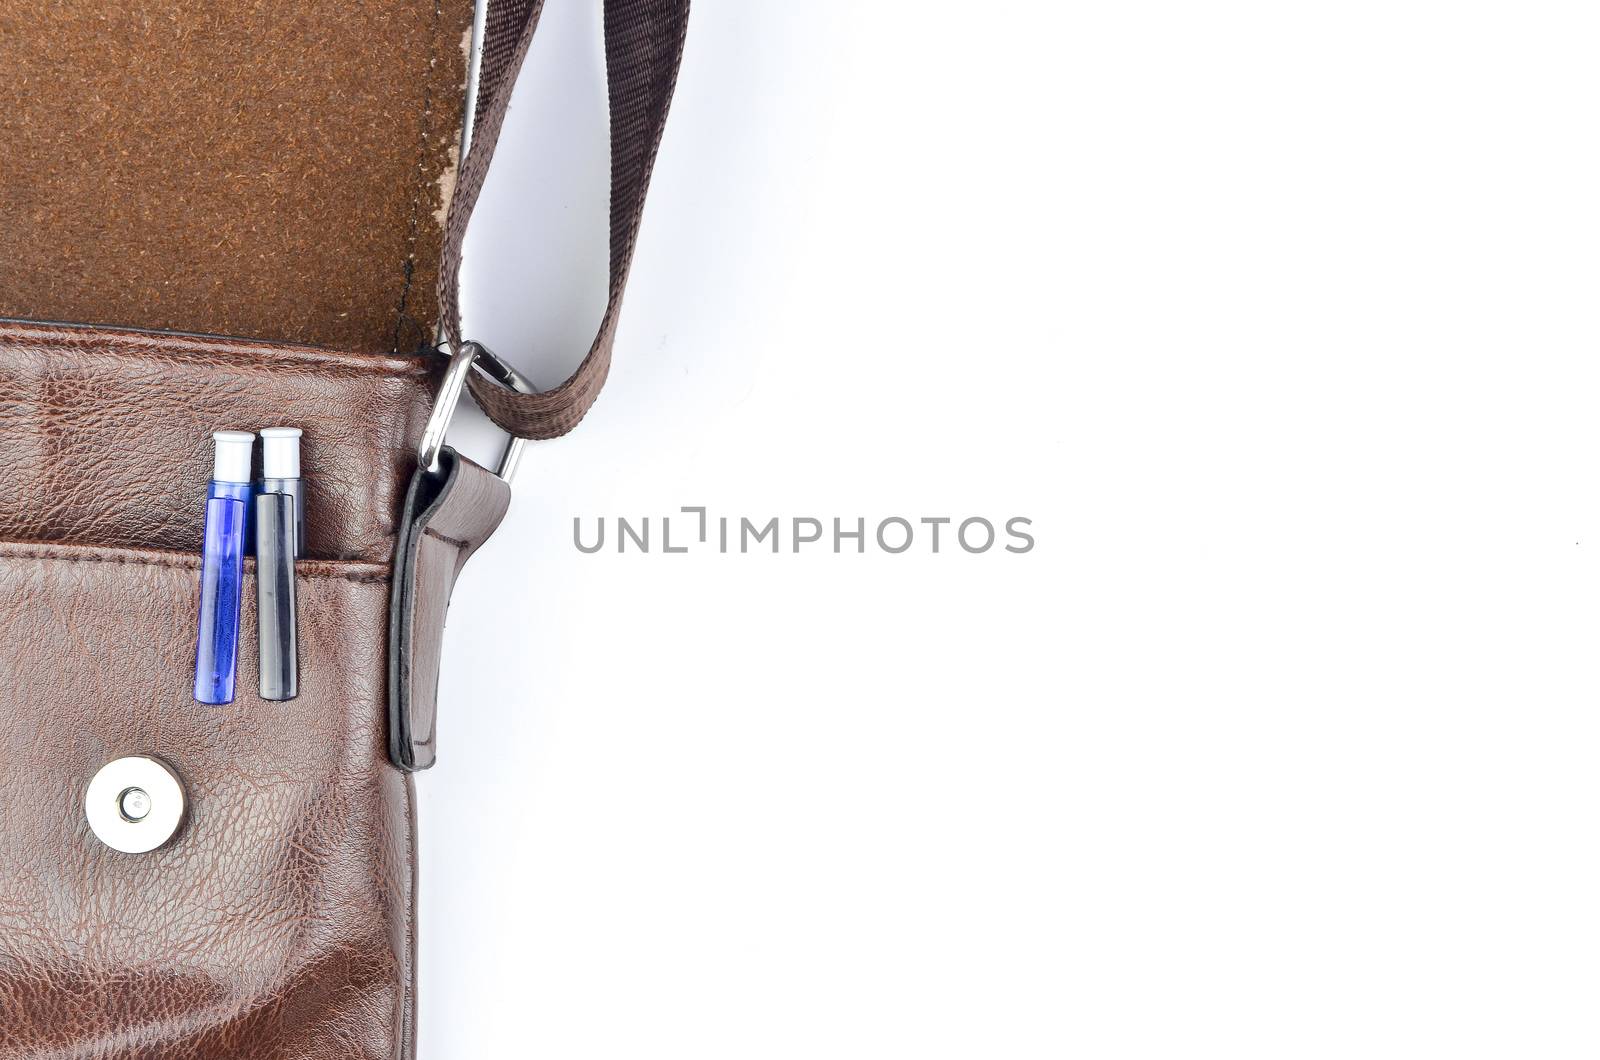 Brown sling bag on white background. Selective focus.